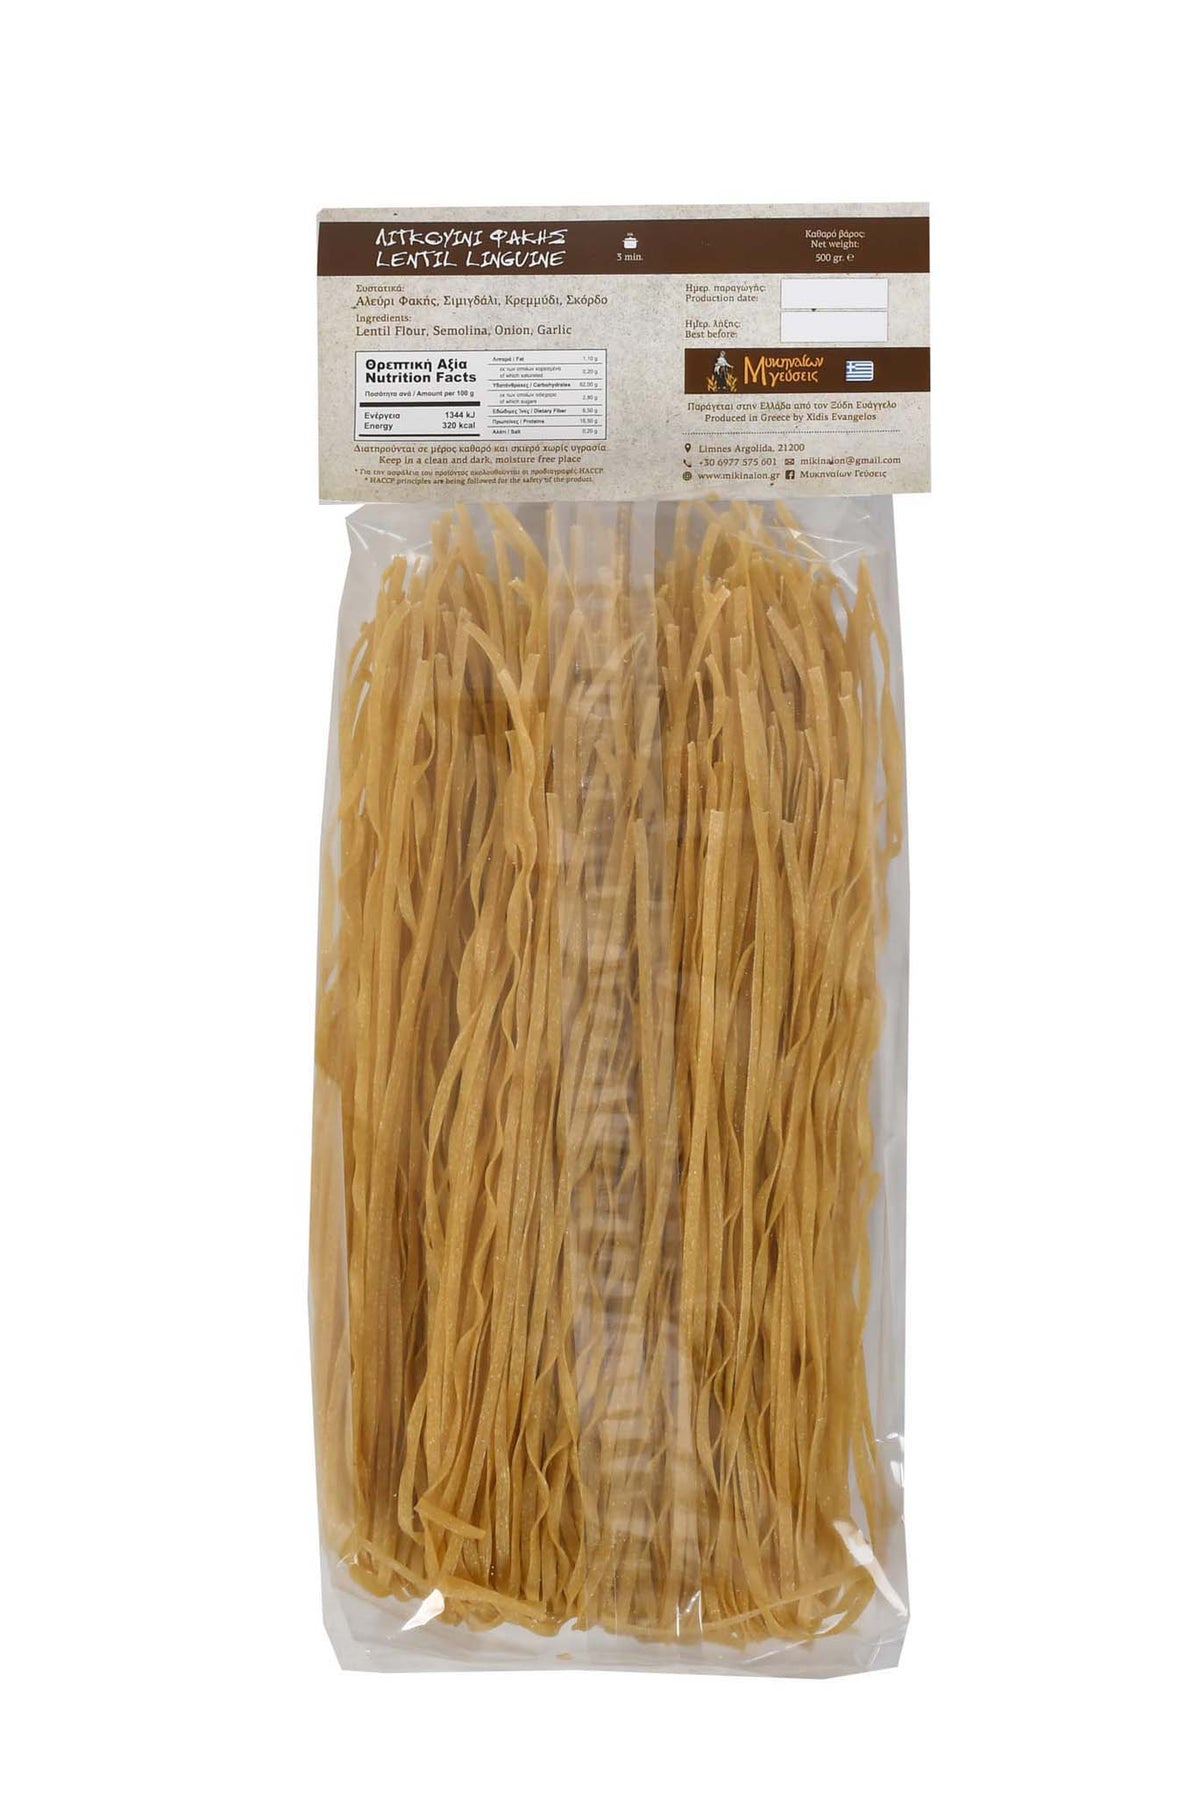 Back of package of Mikinaion Gefsis Linguine with Lentil, Onion and Garlic pasta